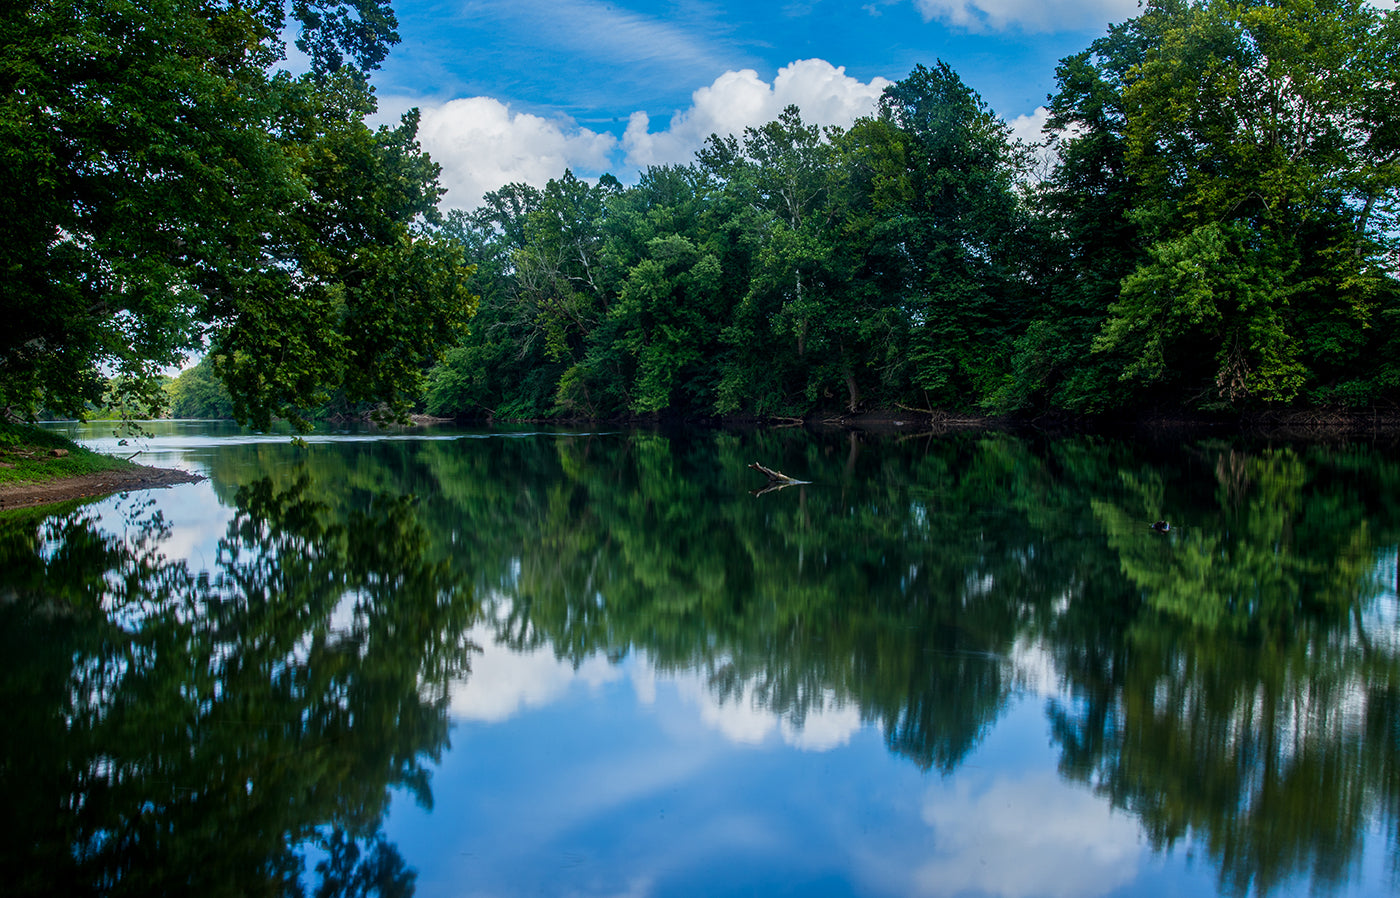 Schuylkill River at Rivertribe Outdoors (photo by Left Photo Studio))